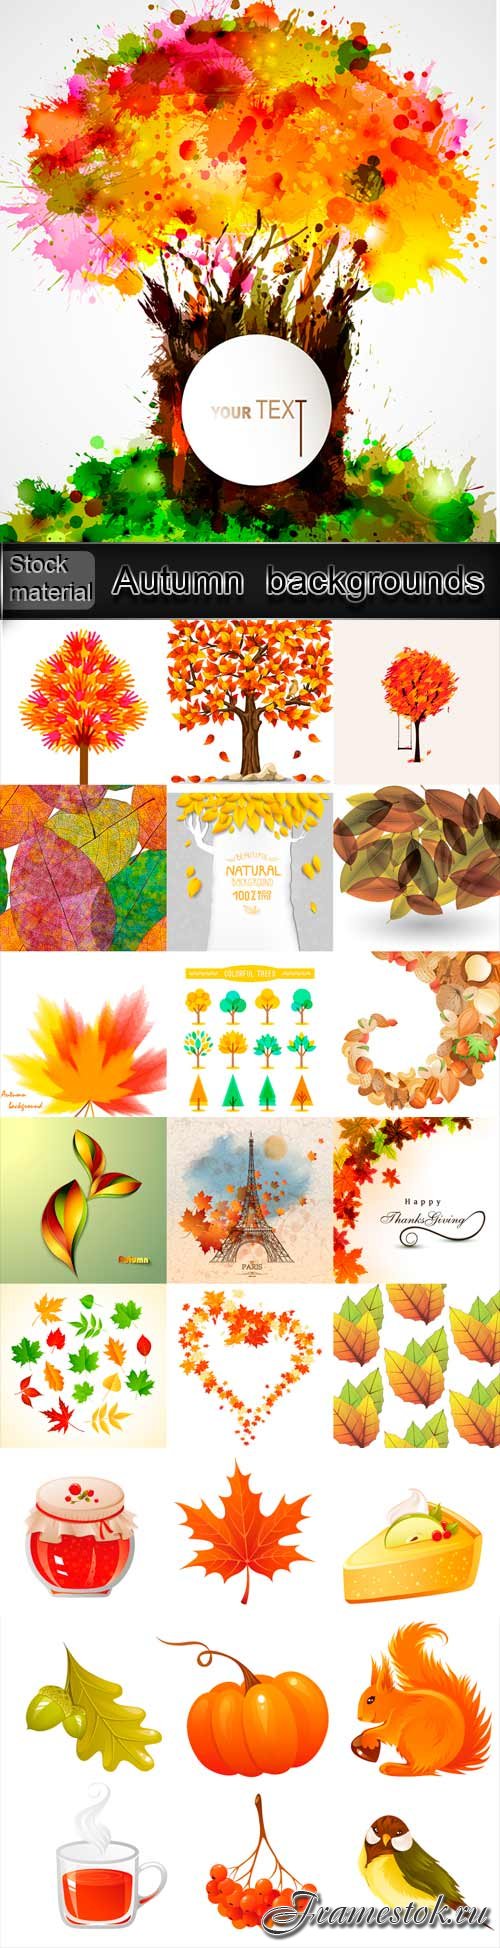 Autumn vector backgrounds with trees and leaves